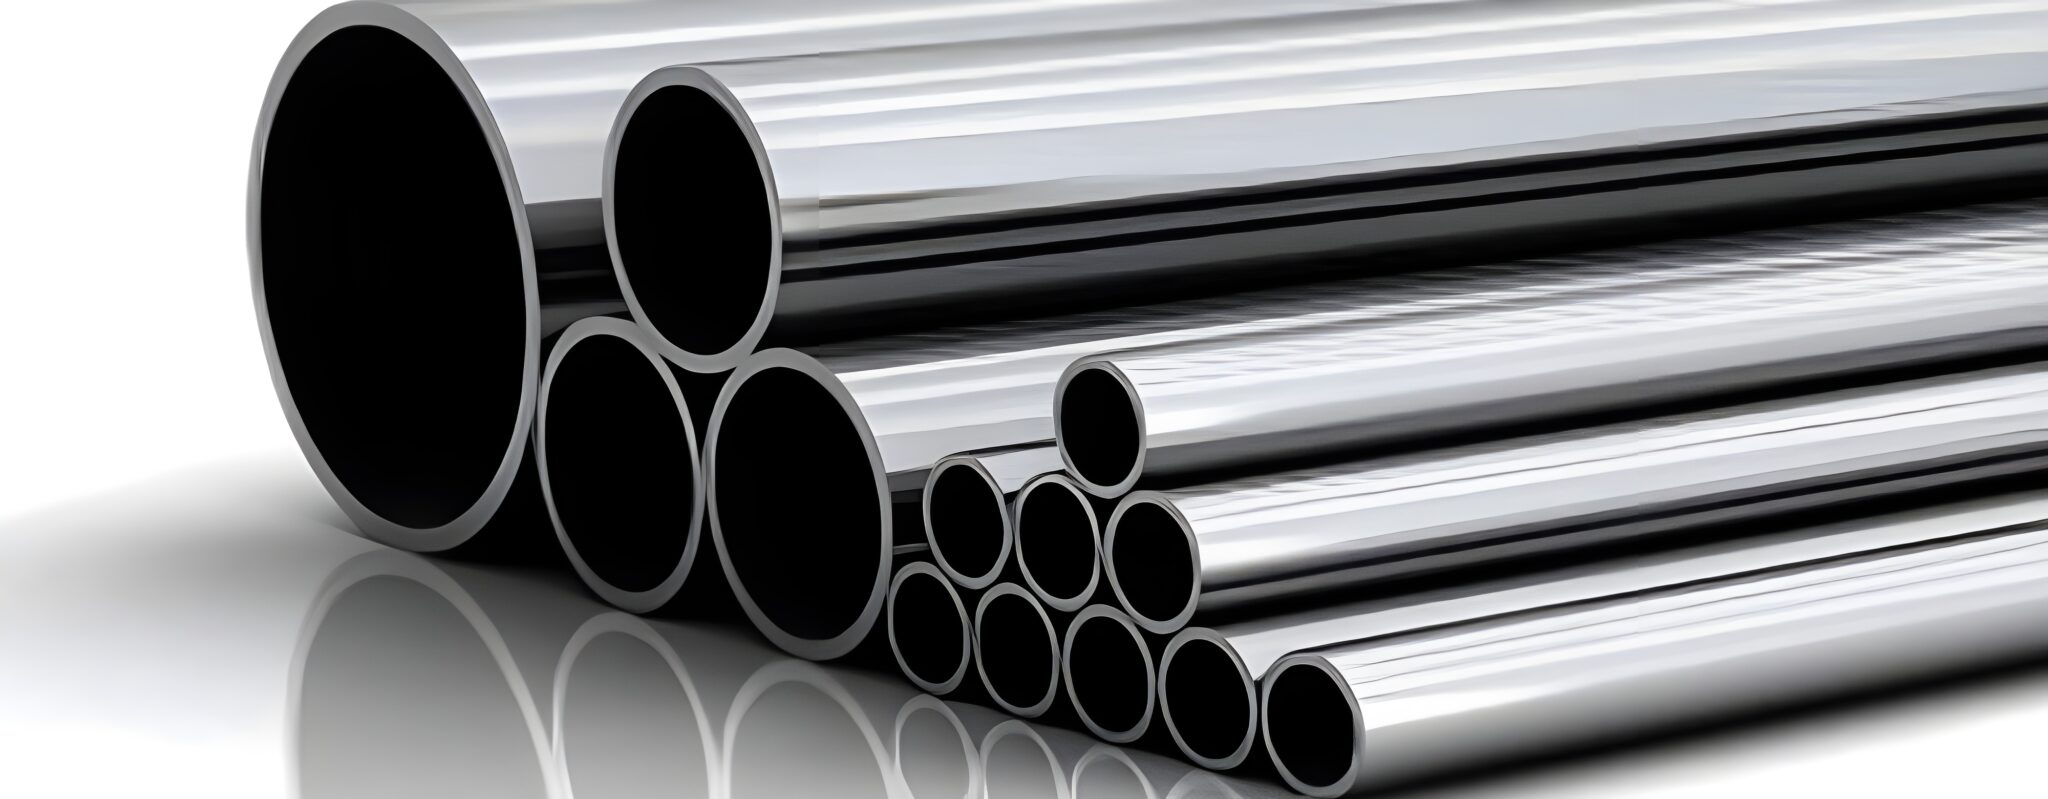 stainless steel 304l pipes & tubes